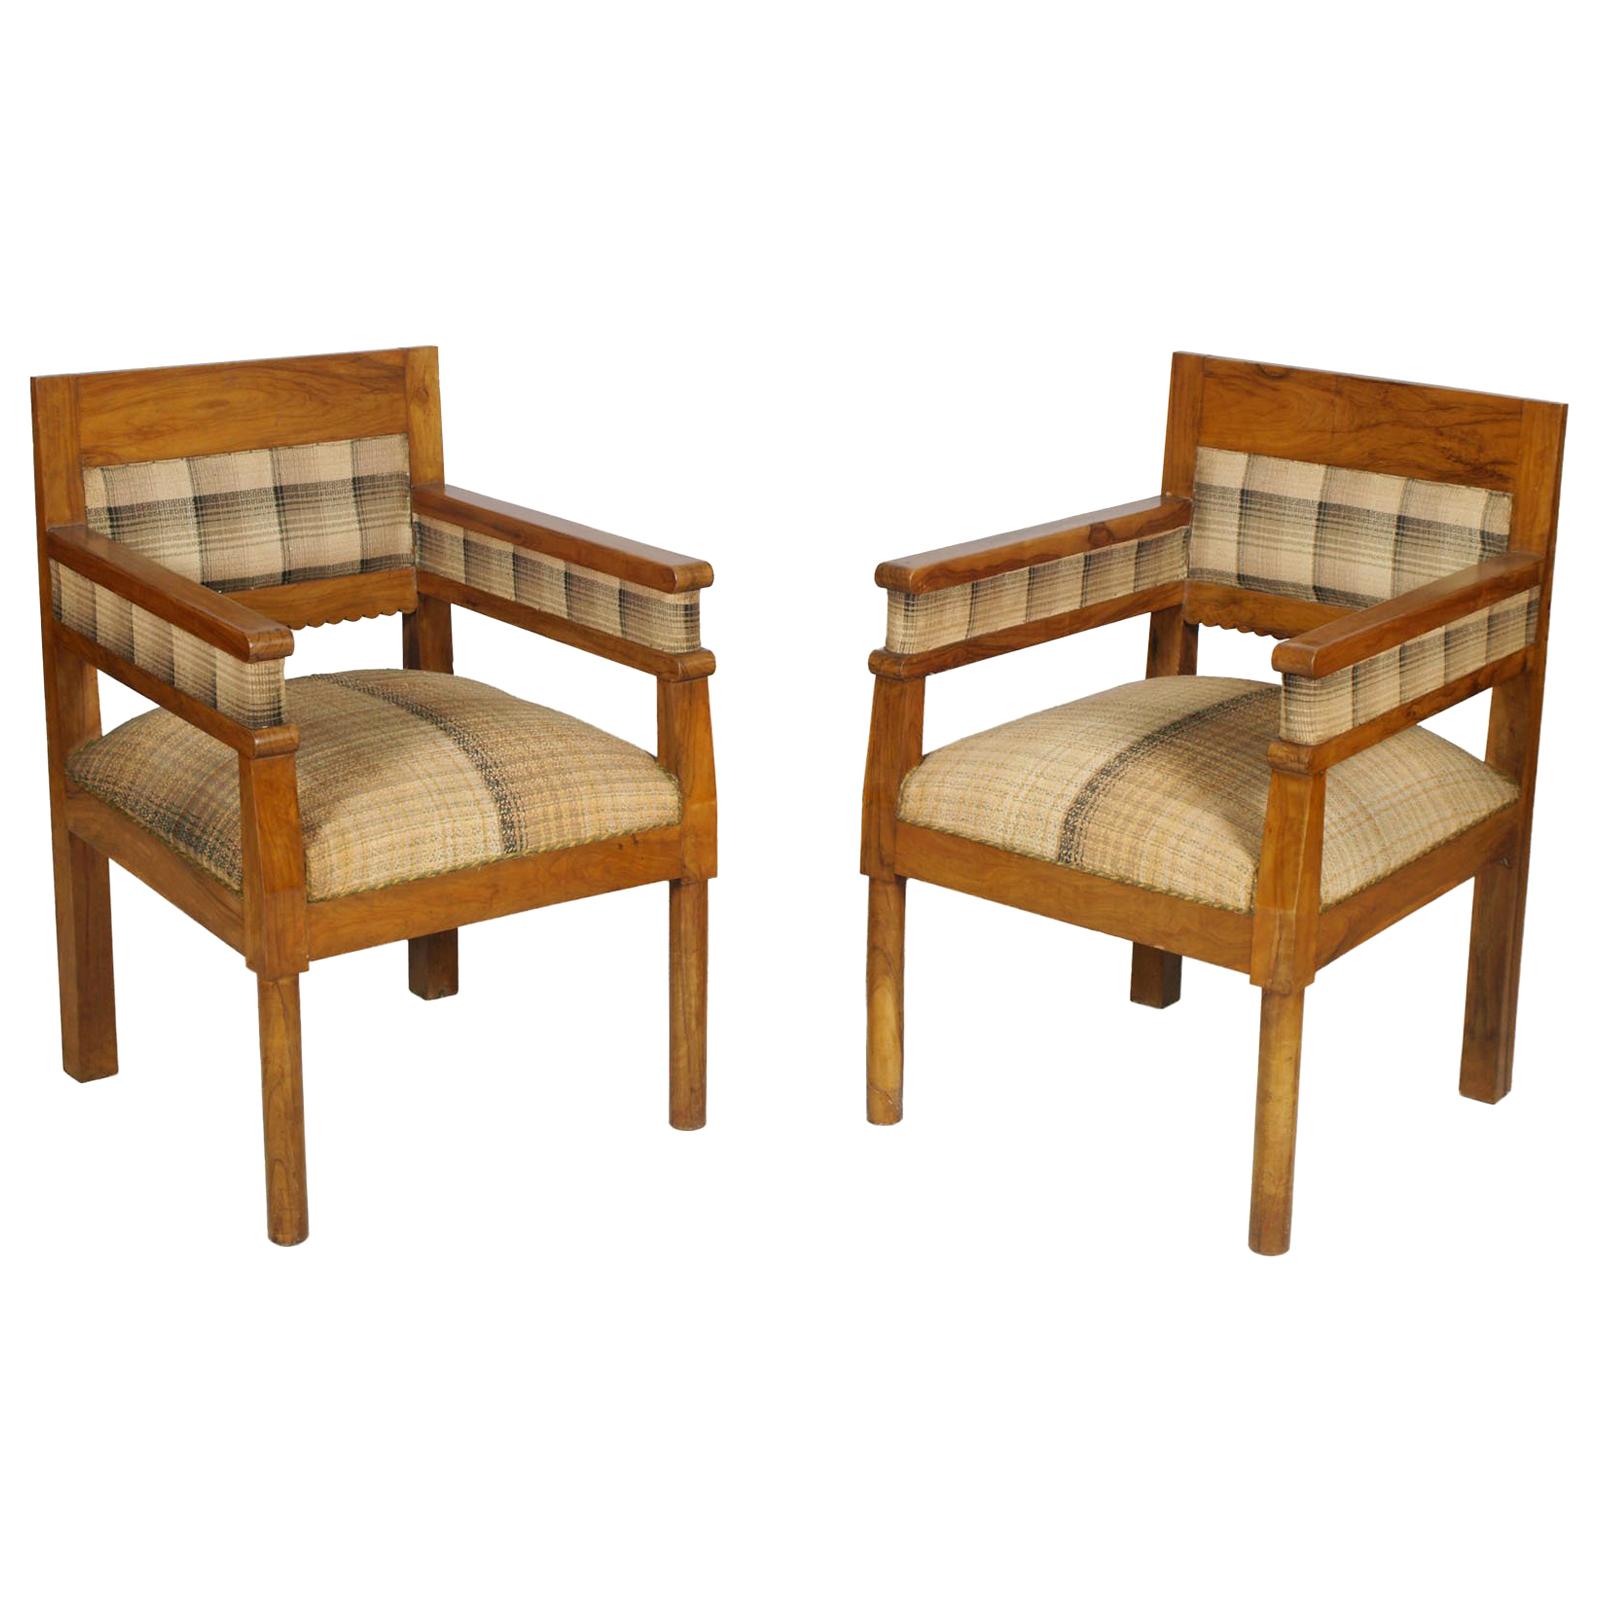 Italy Early 20th Century Art Deco Pair Armchairs, Solid Olive Wood, Wax Polished For Sale